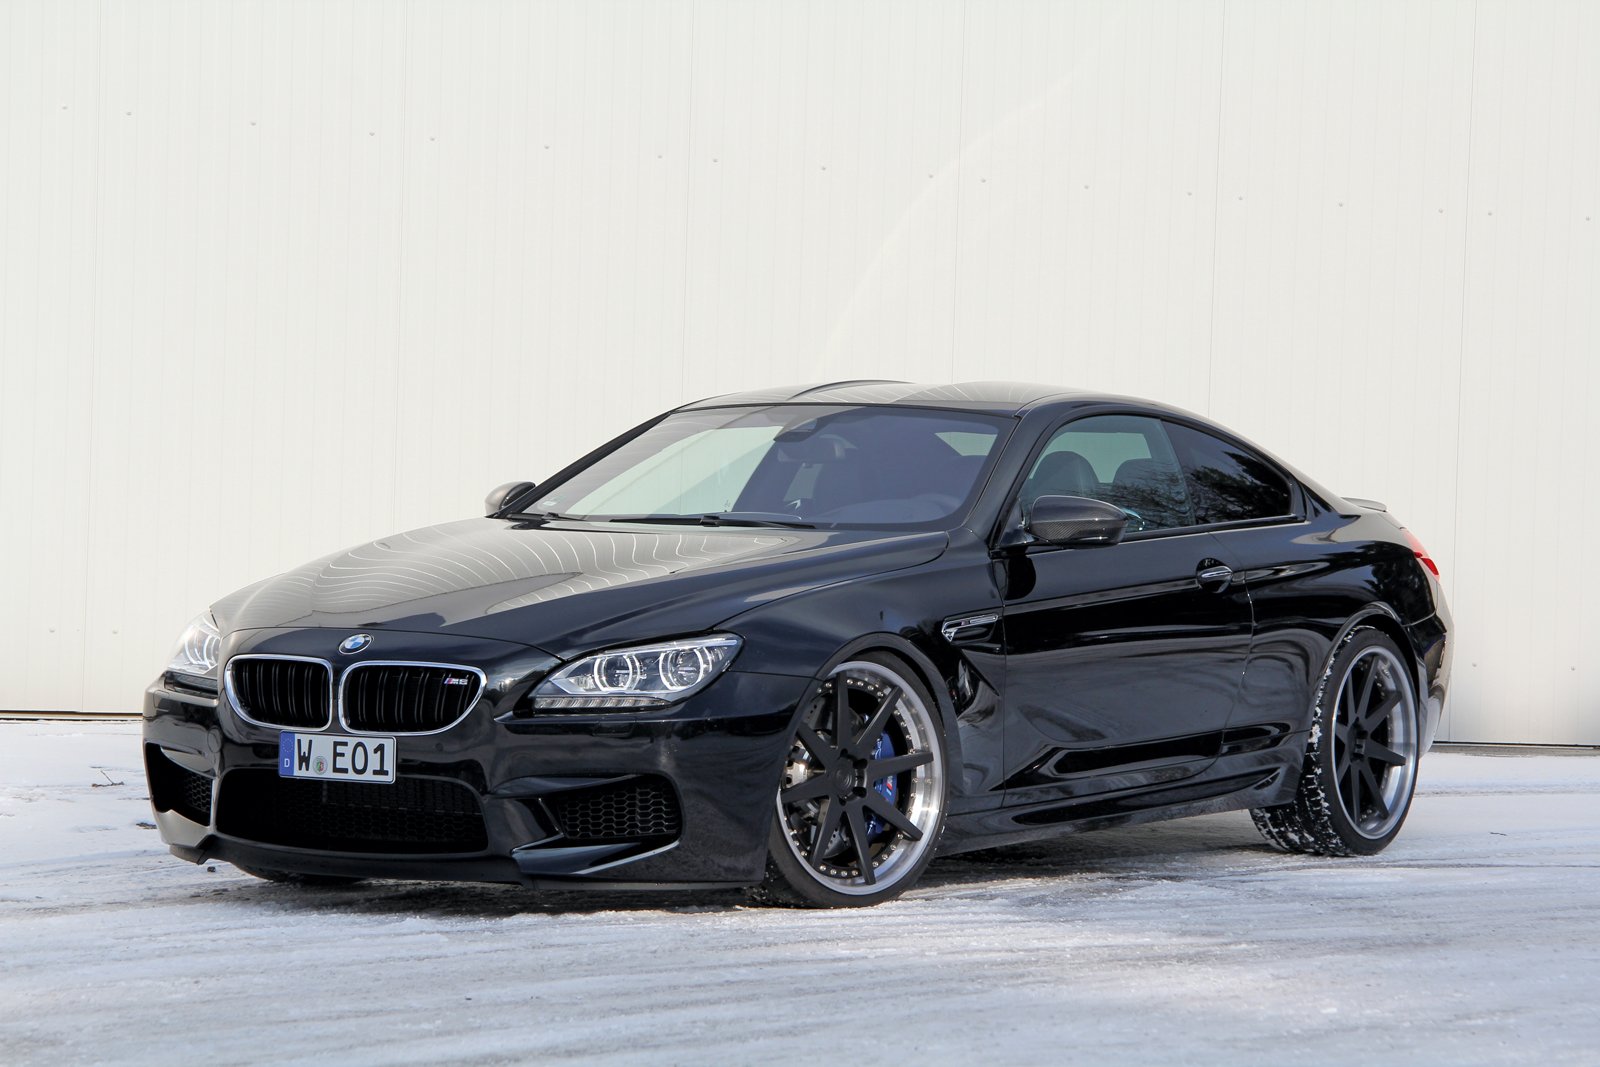 BMW M6 Performance Upgrade Guide - BMW Tuning